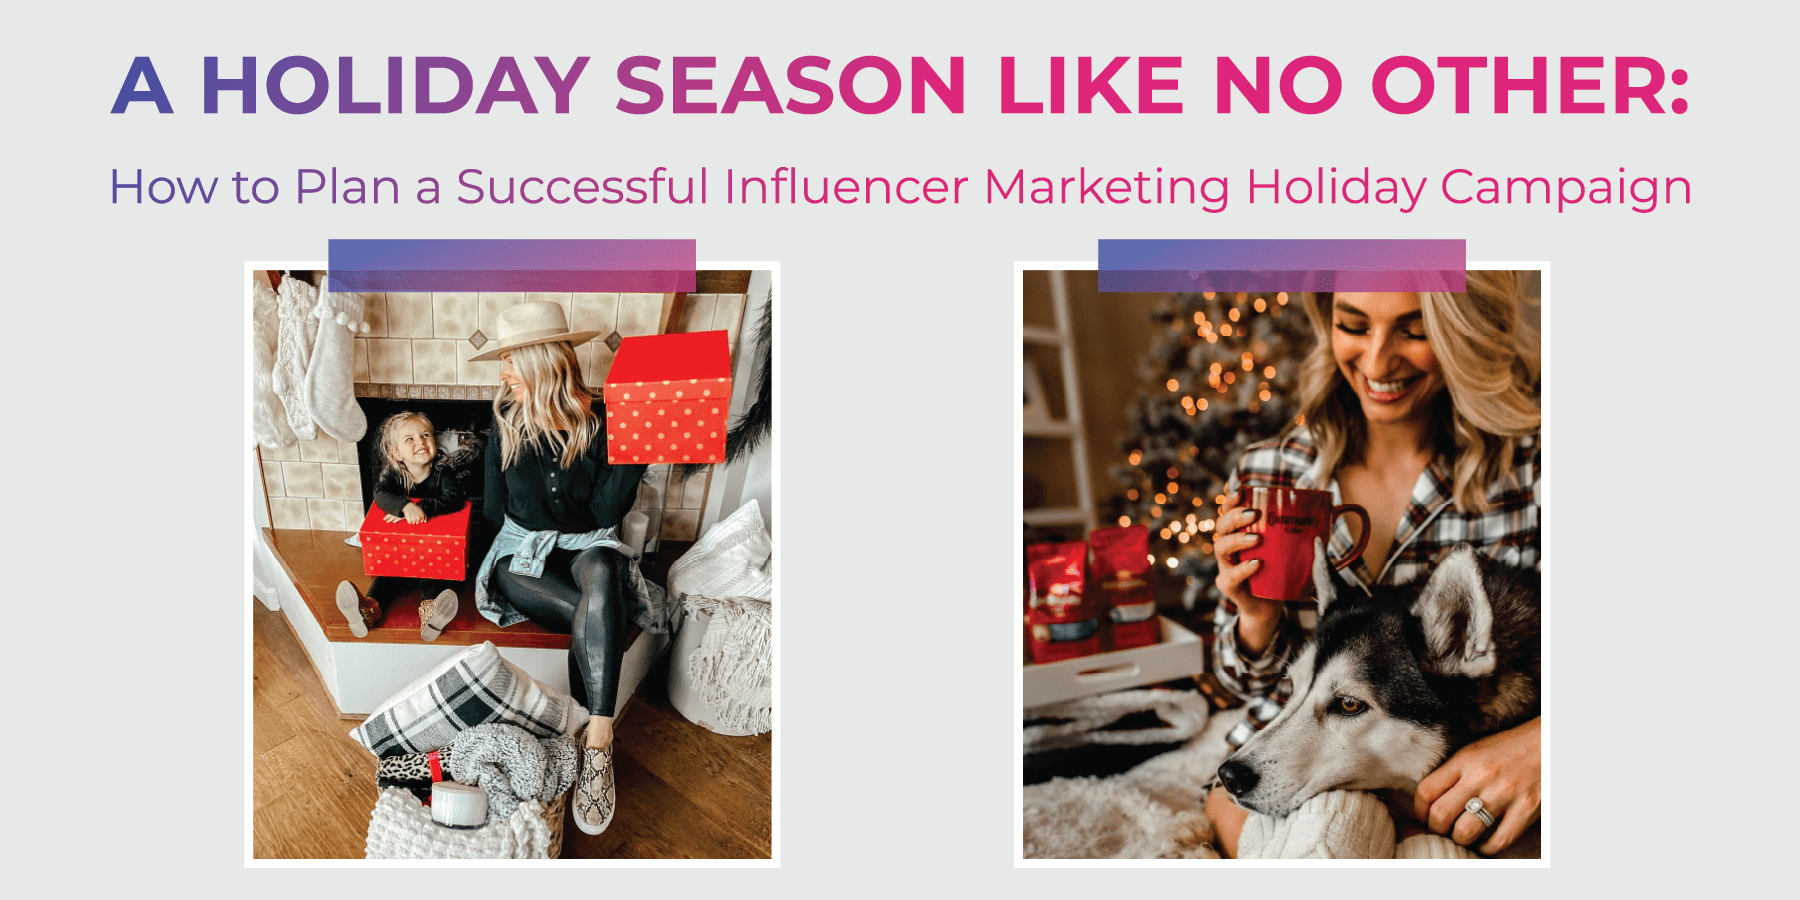 Holiday influencer marketing campaign